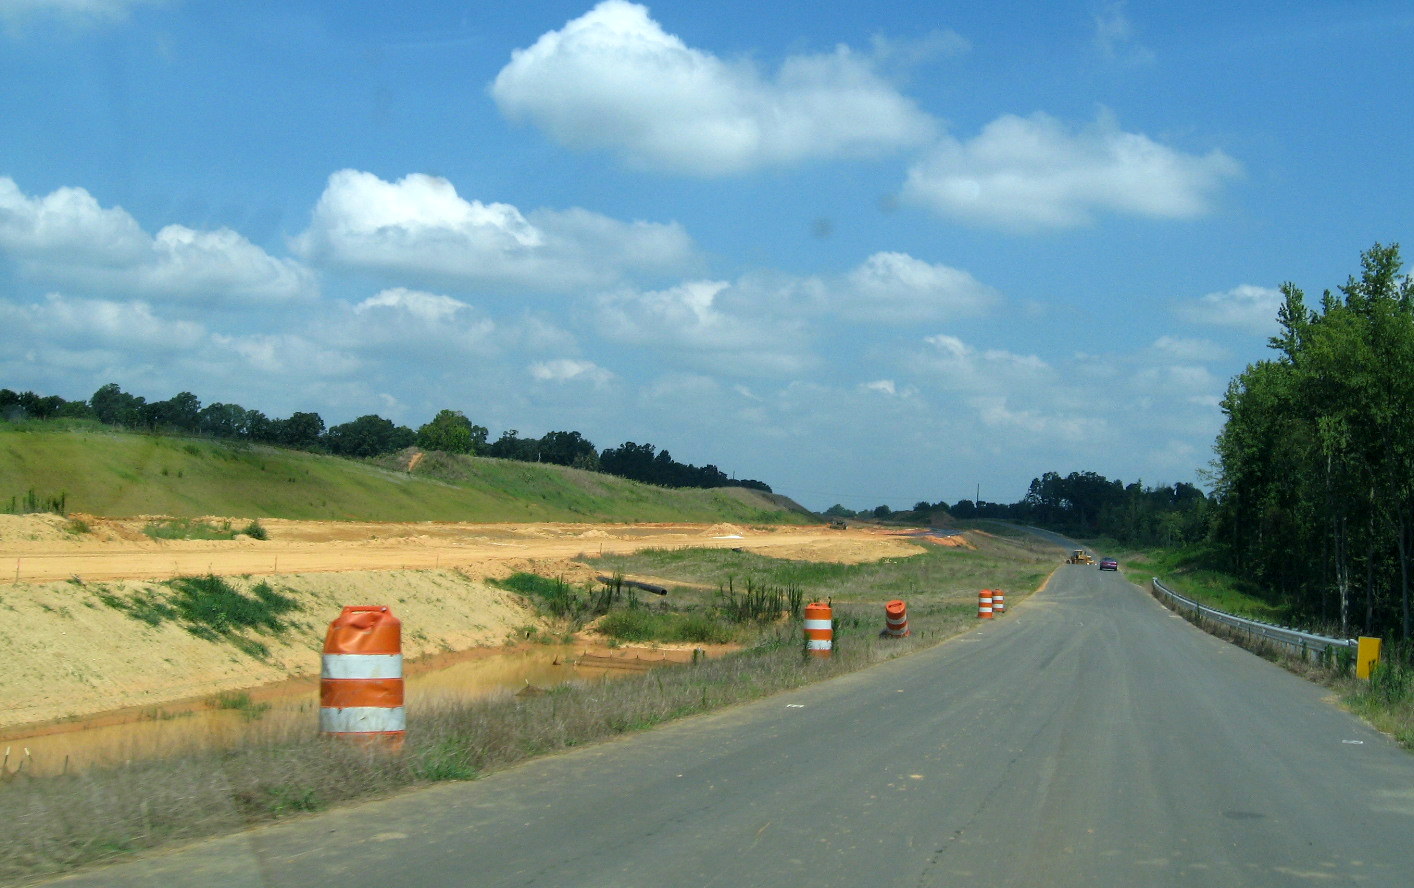 Photo of new alignment for Branson Davis Rd along completed bridge over future 
I-74 freeway in Aug. 2012